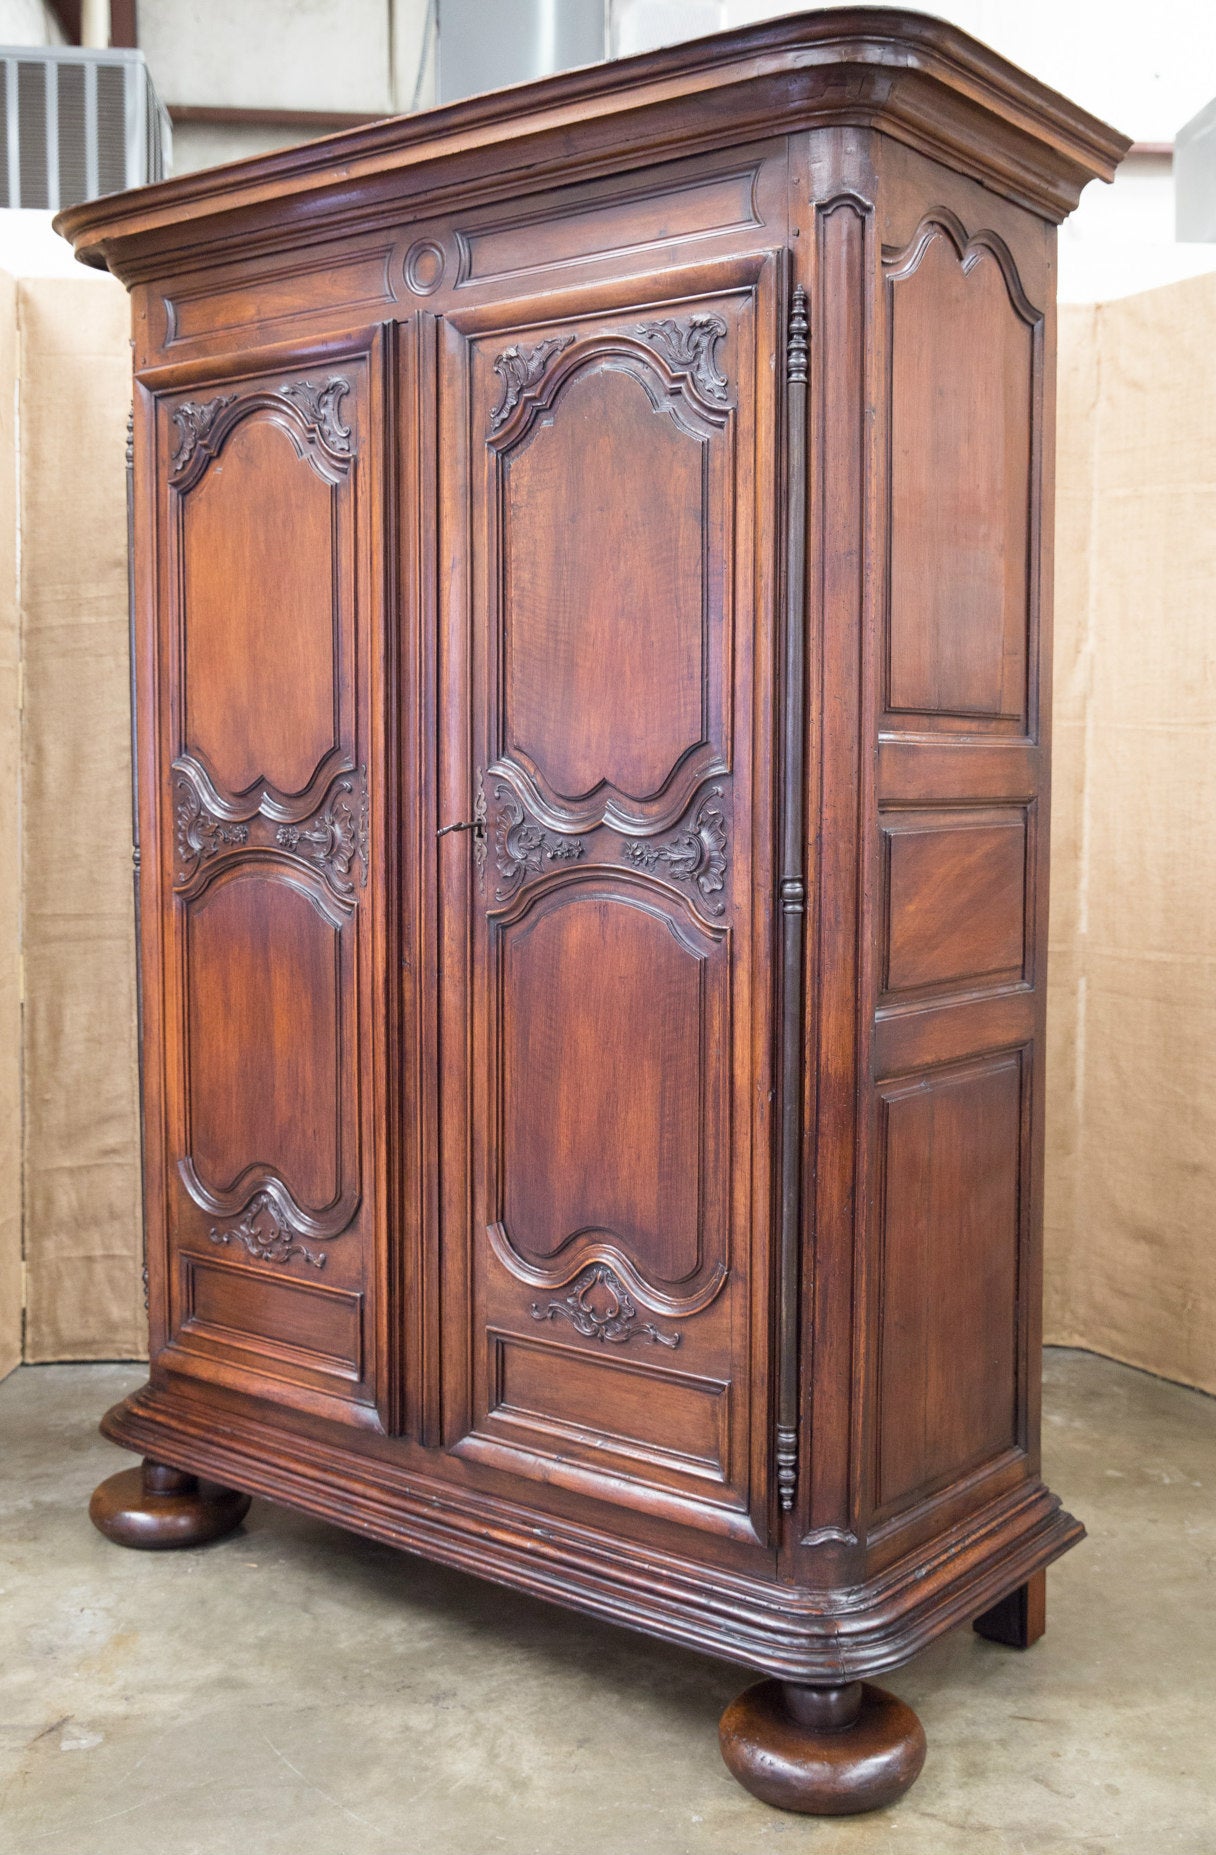 Exceptional late 17th century Louis XIV period armoire handcrafted of solid walnut by skilled artisans near the historic seaside resort of La Baule in the Pays de la Loire region. The stepped cornice sits atop a carved frieze with center galette